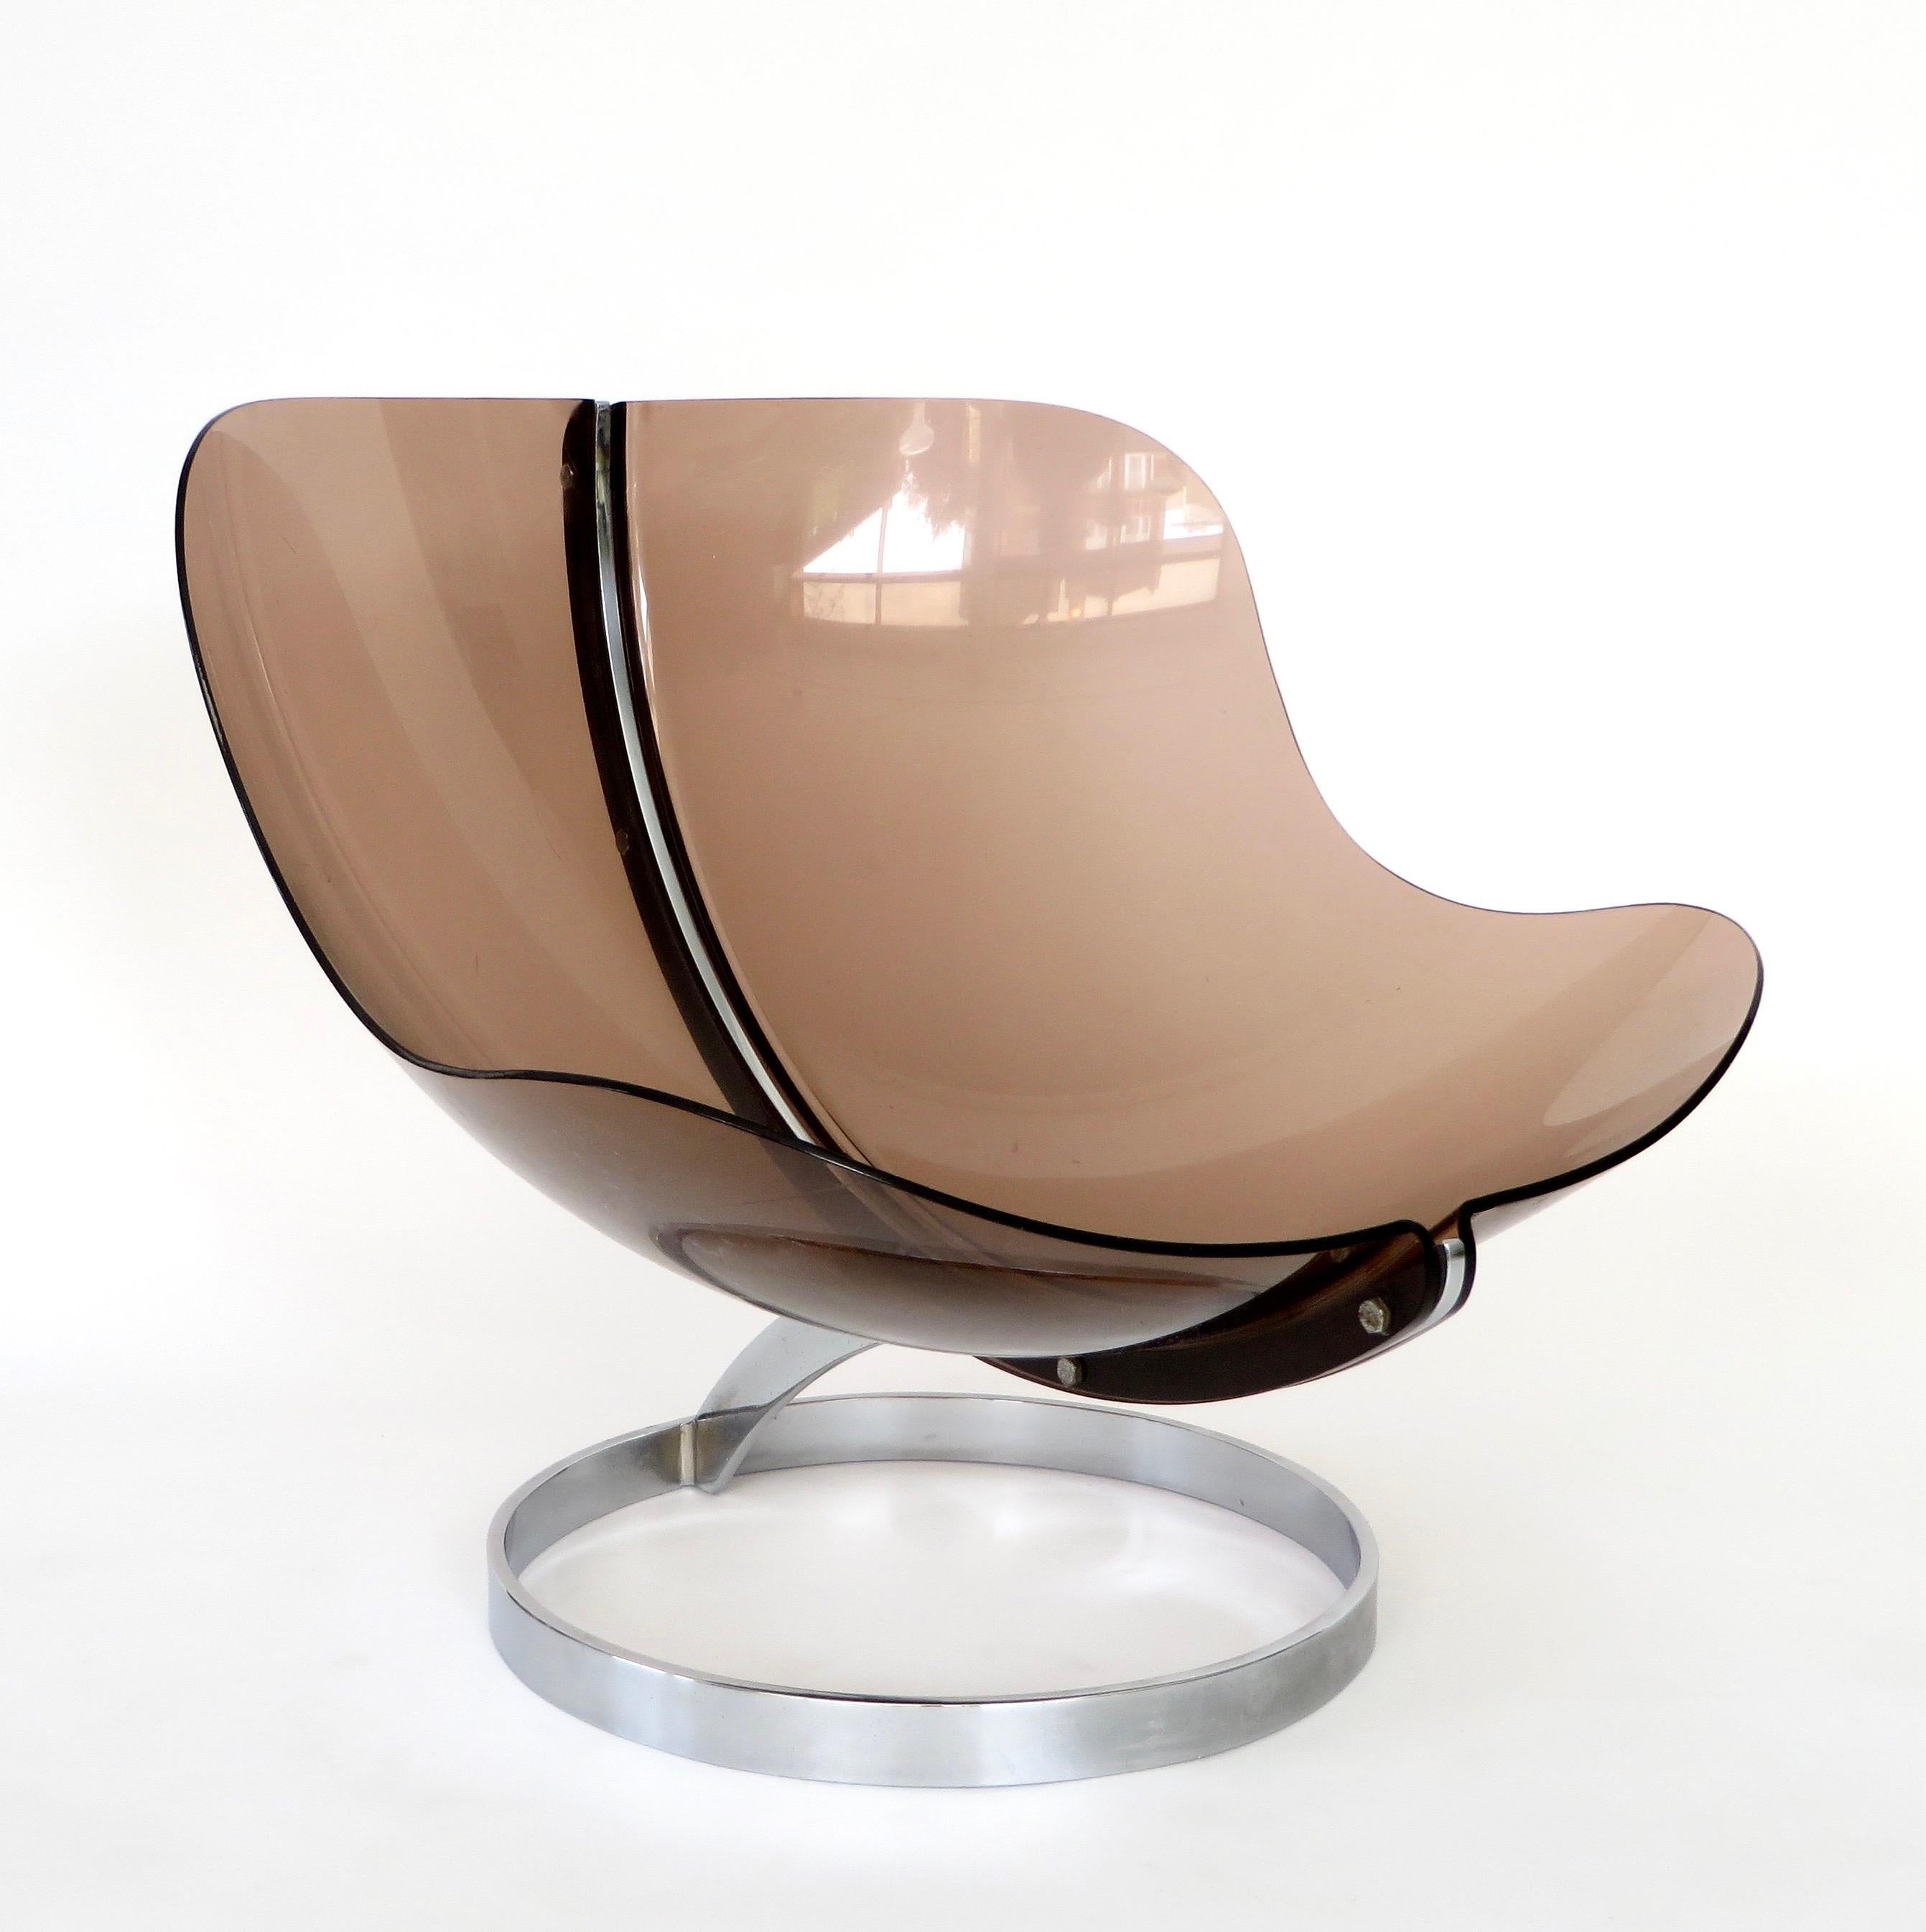 Boris Tabacoff French Sphere Chair Lucite Altuglas and Chrome c1971 For Sale 3